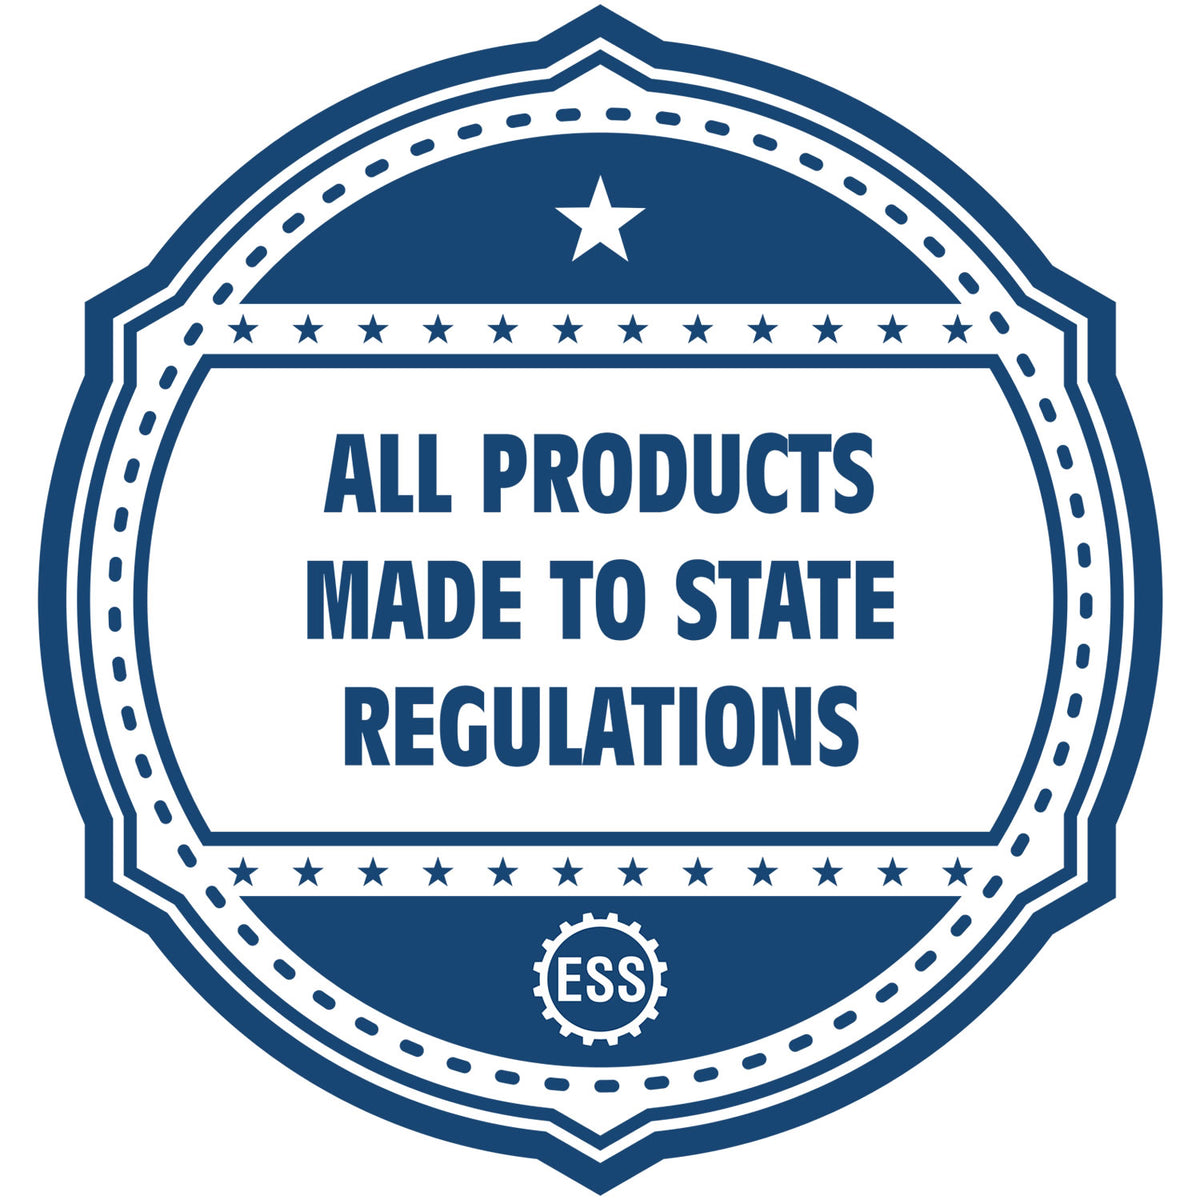 An icon or badge element for the Self-Inking South Carolina Landscape Architect Stamp showing that this product is made in compliance with state regulations.